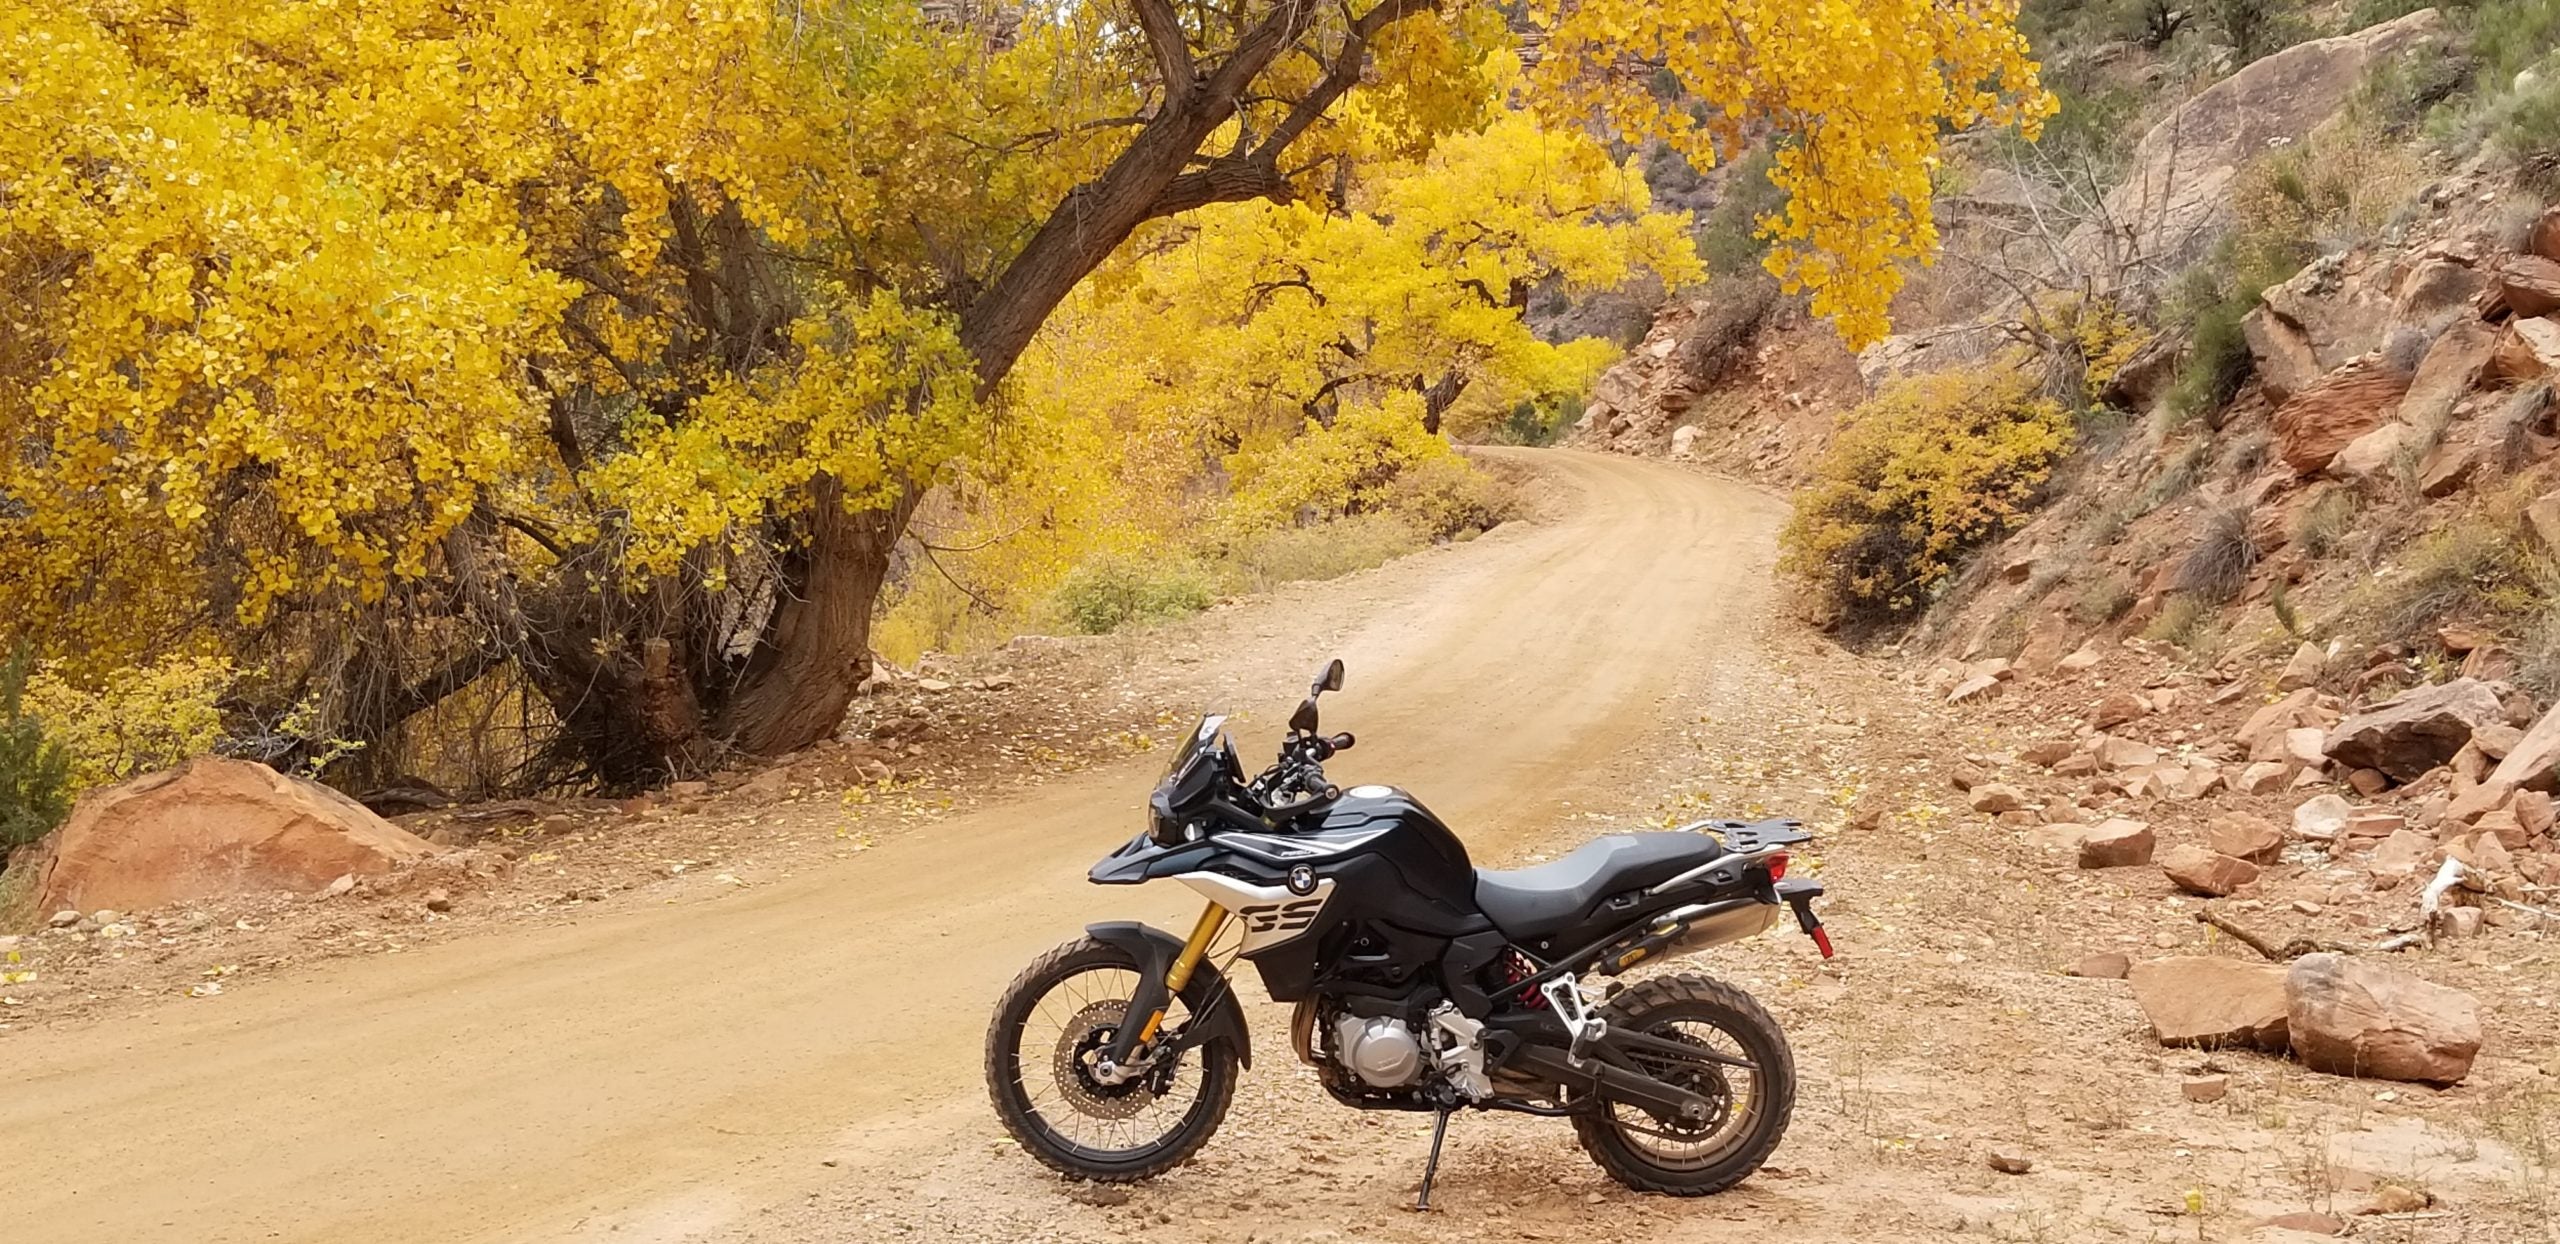 Dirt And Pavement - BMW F 850 GS Full Ride Review - Adventure Rider